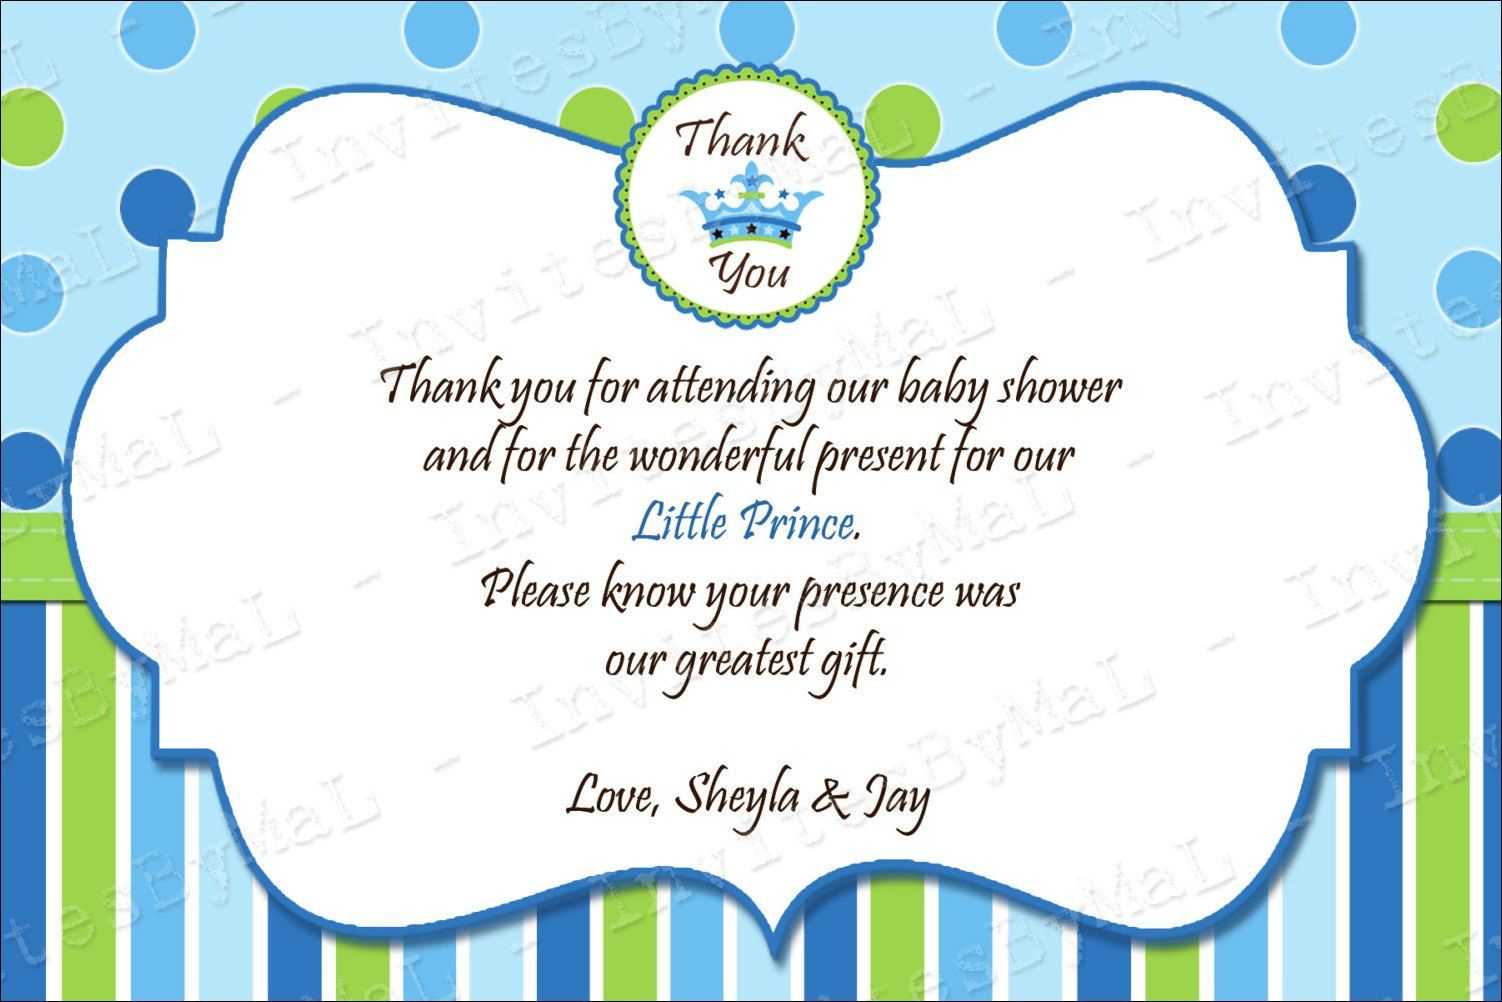 40 Beautiful Baby Shower Thank You Cards Ideas | Baby | Baby With Thank You Card Template For Baby Shower